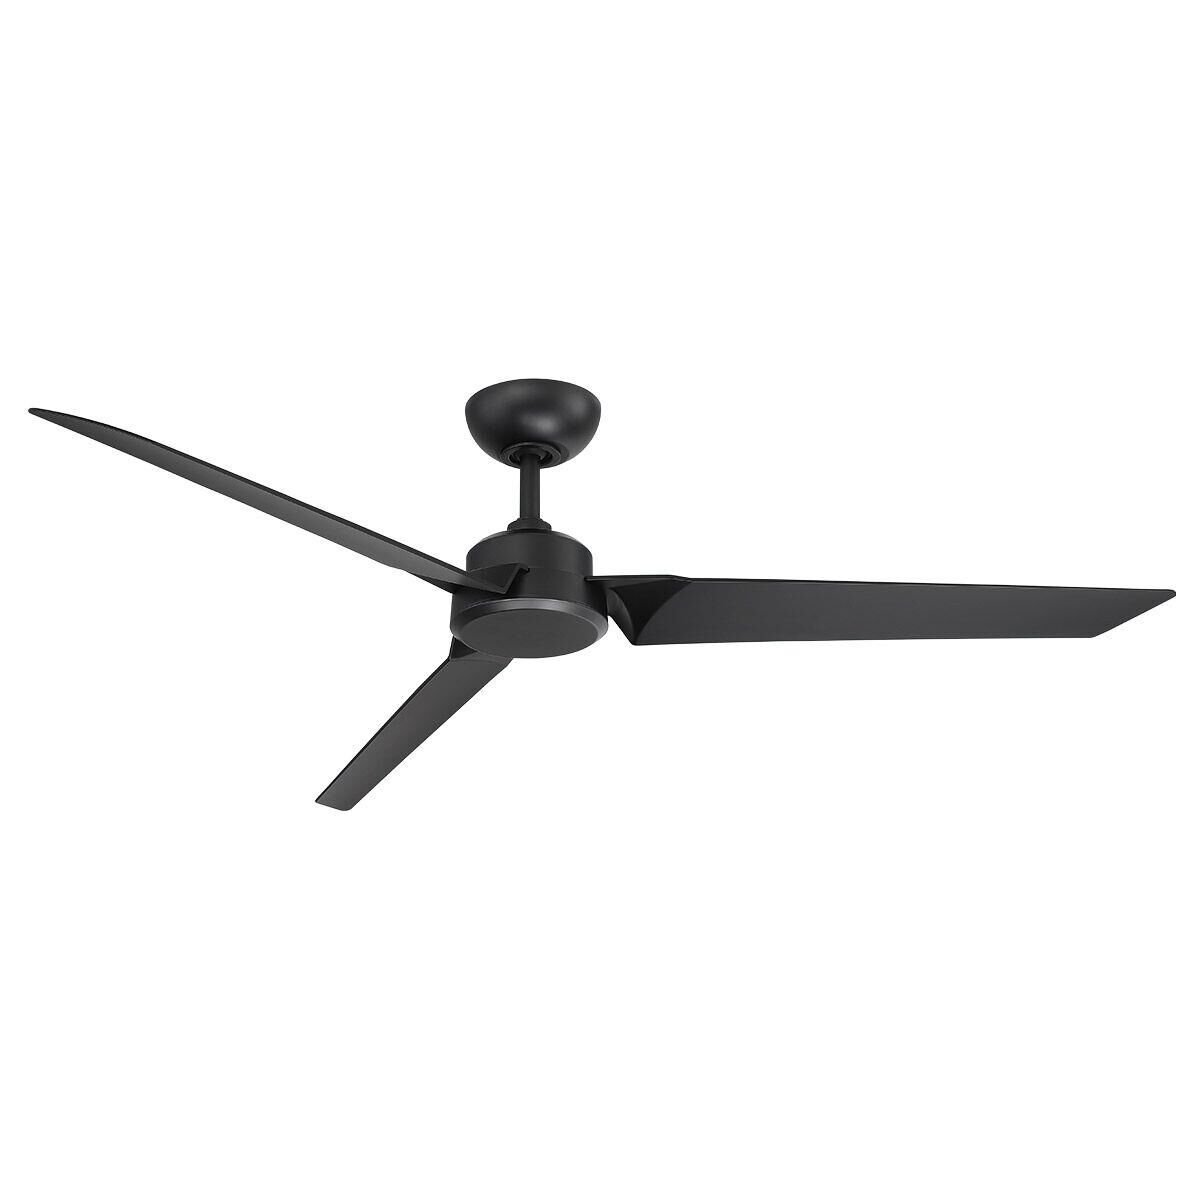 Photos - Fan Modern Forms Roboto Outdoor Rated 62 Inch Ceiling  Roboto - FR-W1910-62